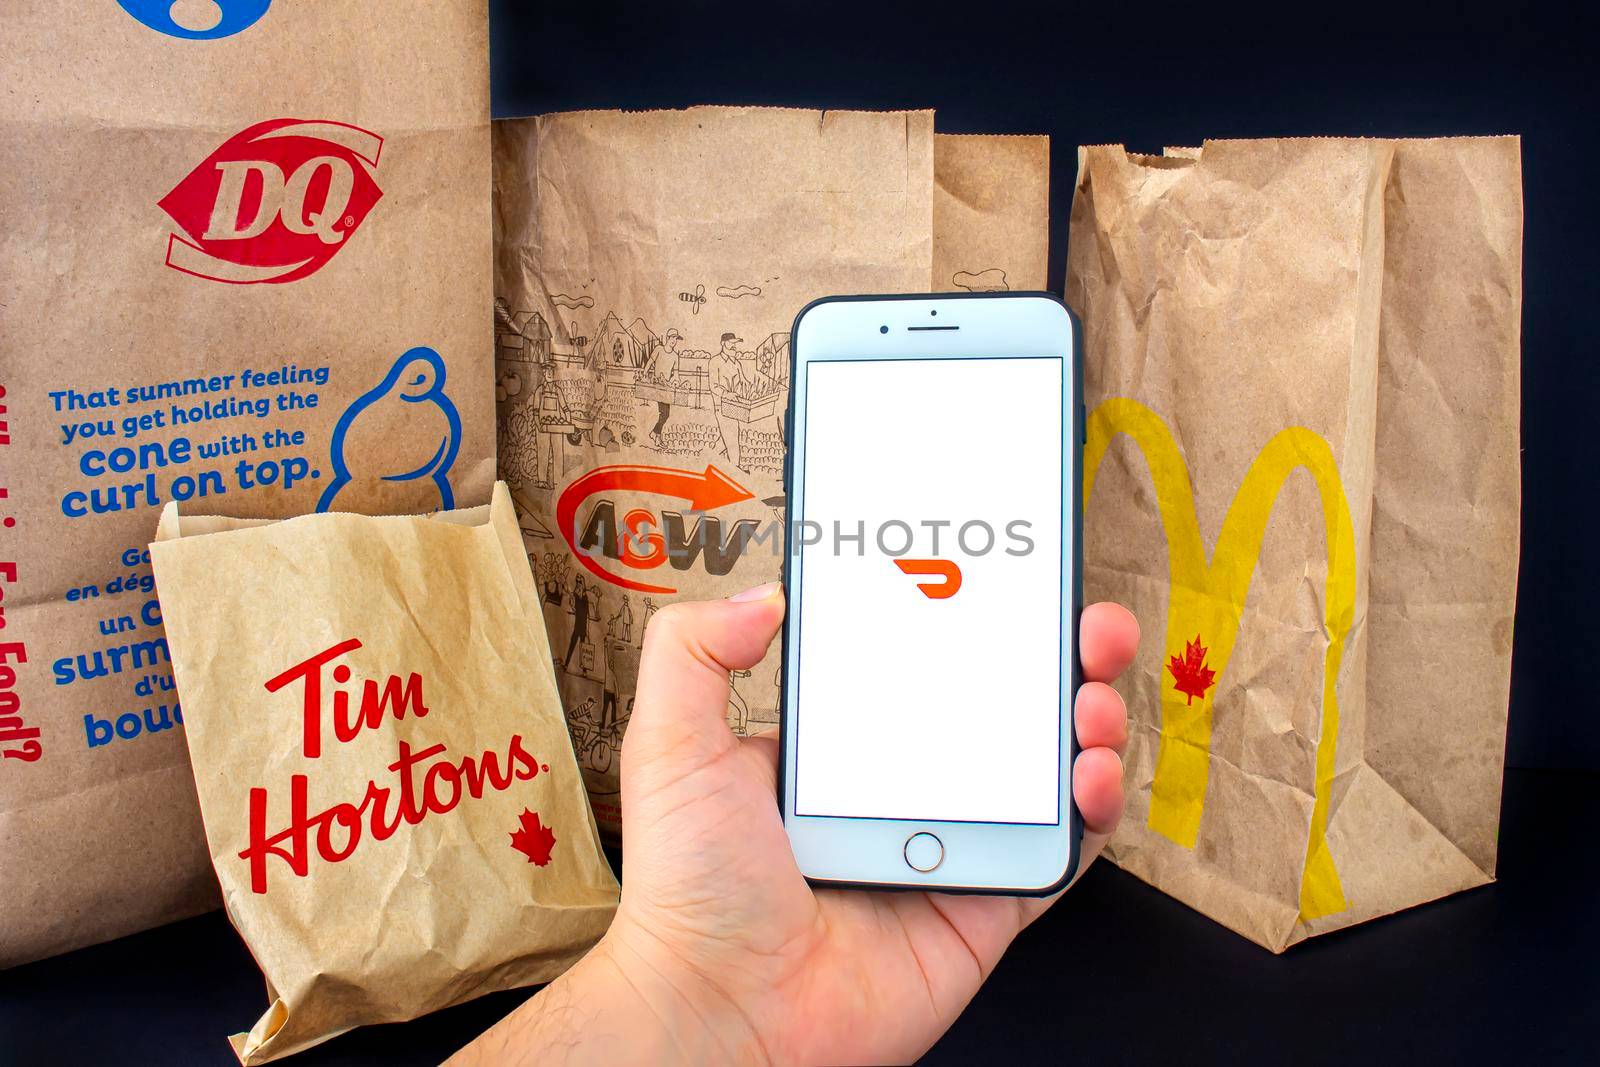 Calgary, Alberta. Canada. April 24, 2020: A person holding an iPhone Plus with the Door Dash application open with delivered food bags from Tim Hourtons, A&W, McDonals and DQ